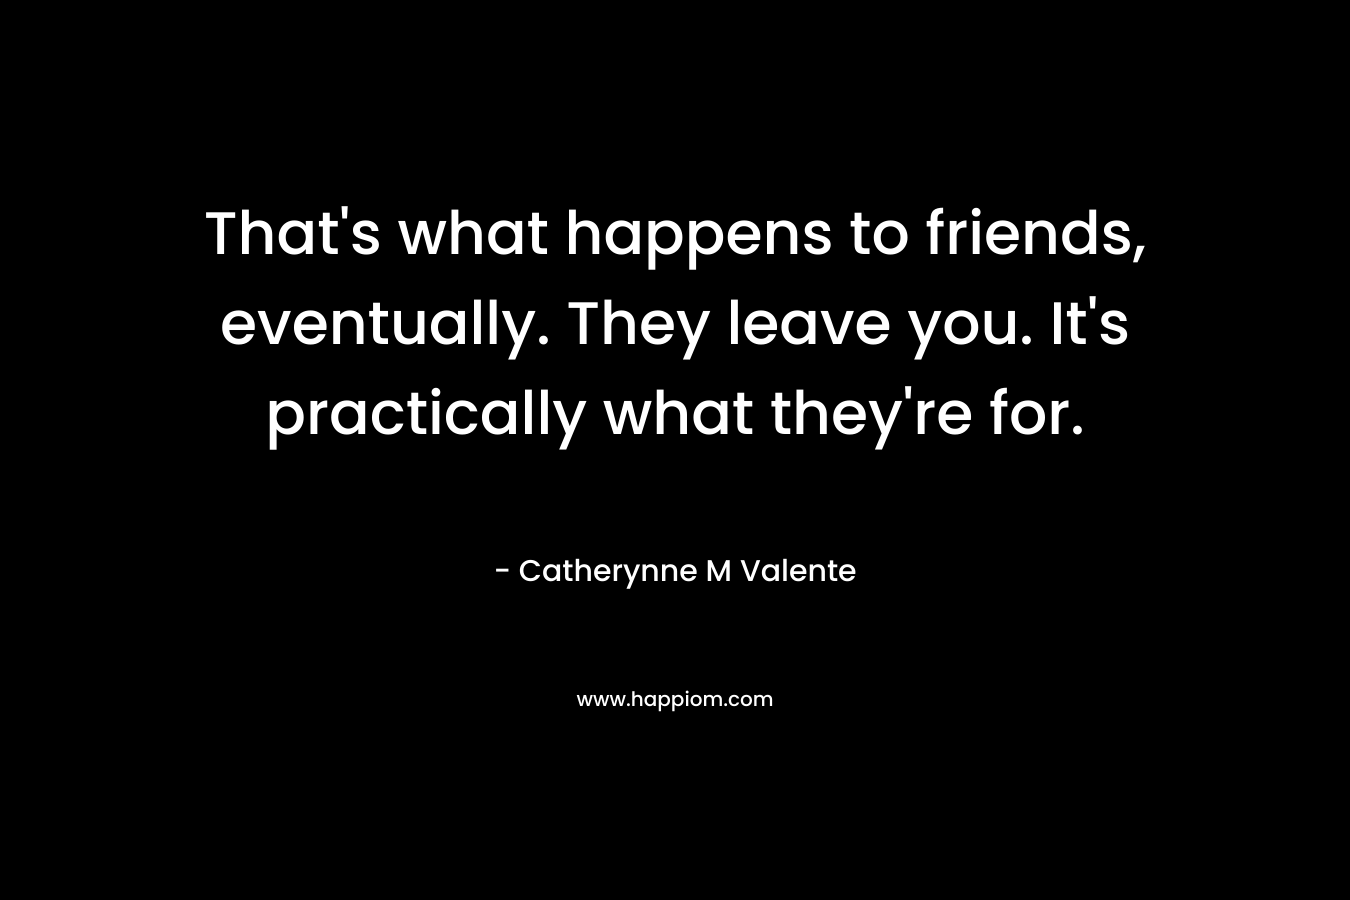 That's what happens to friends, eventually. They leave you. It's practically what they're for.